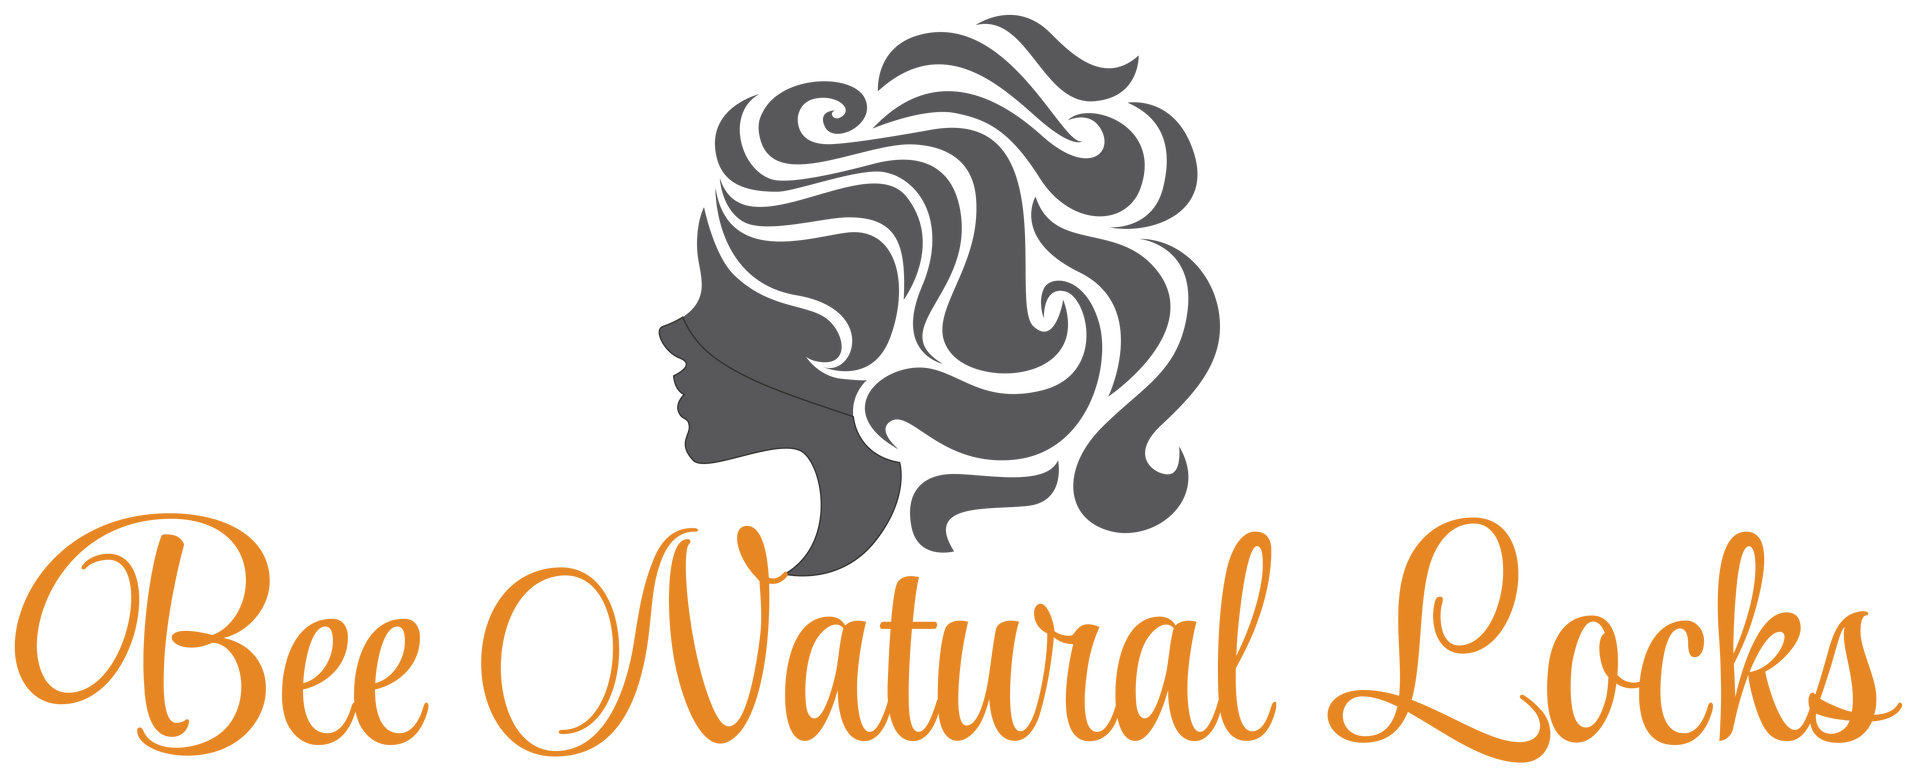 Load video: Bee Natural Locks Products